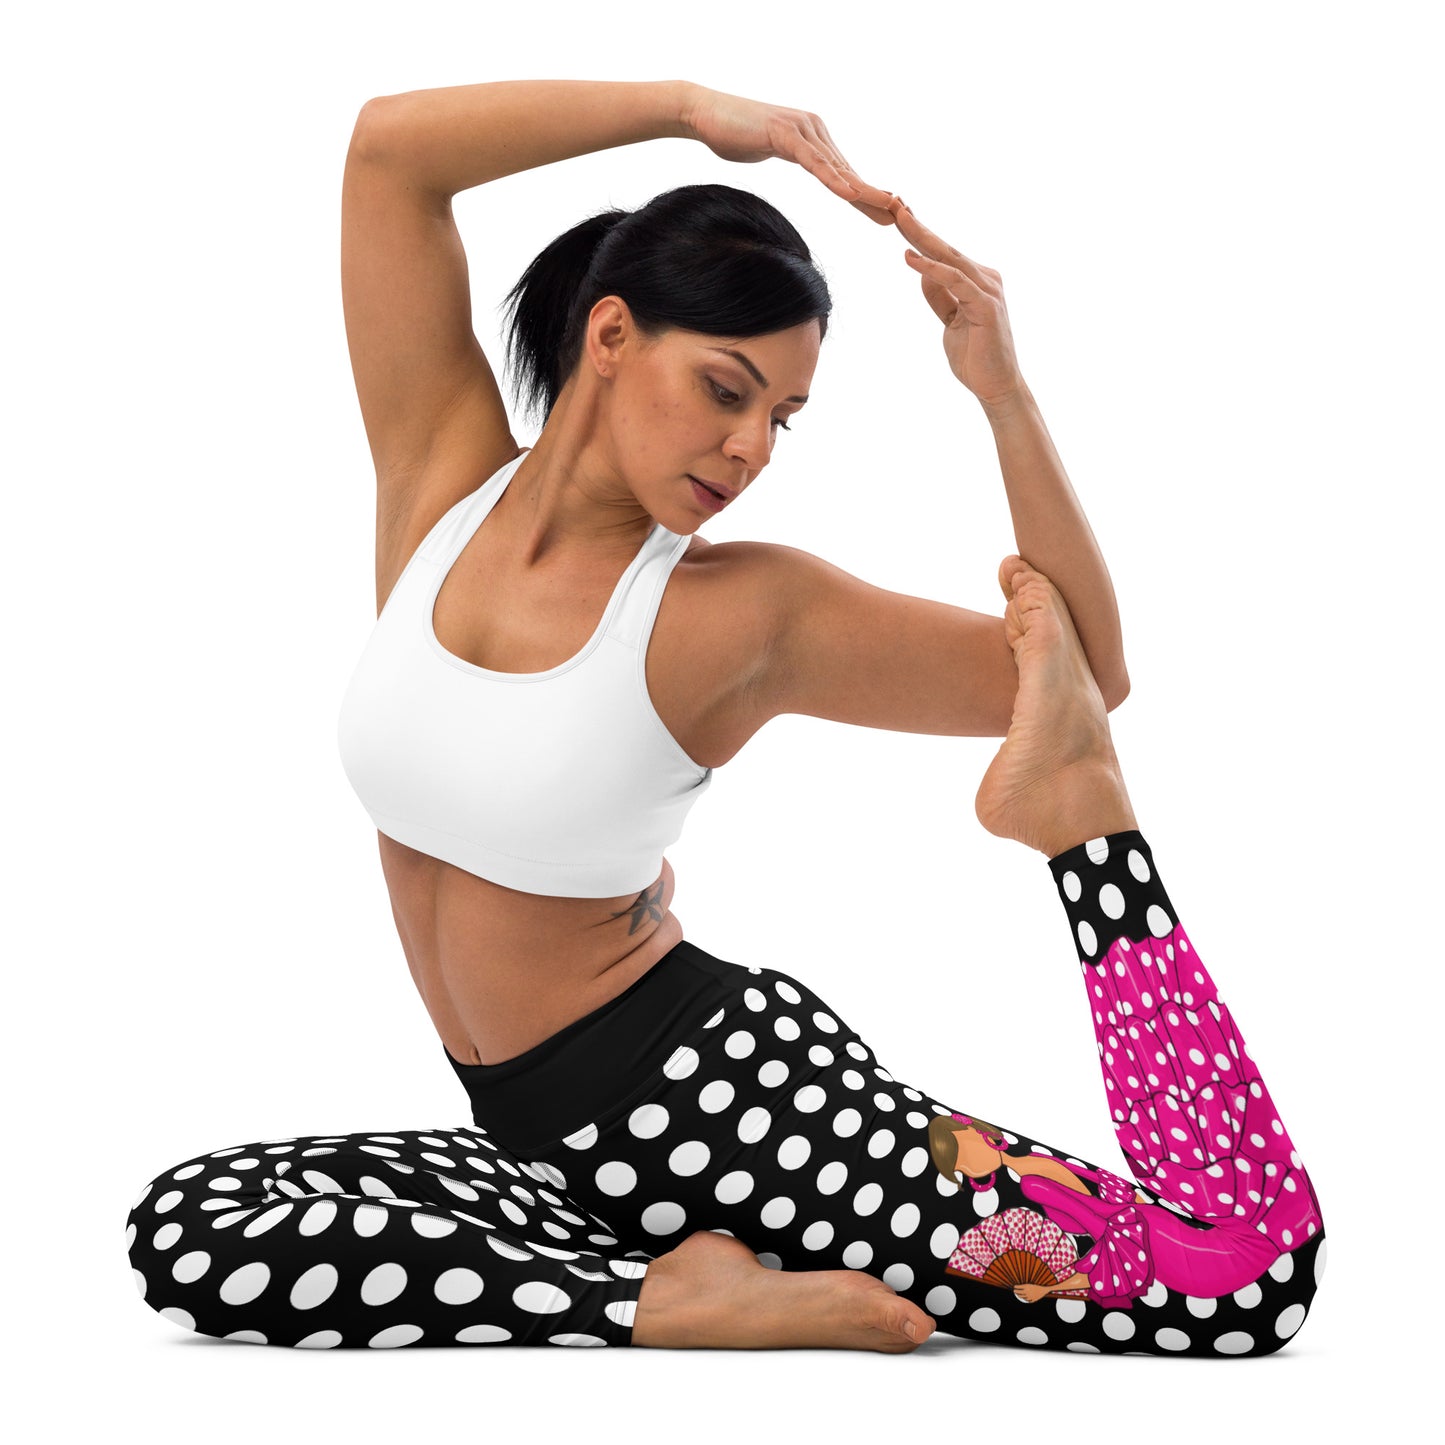 a woman in a white top and polka dot leggings